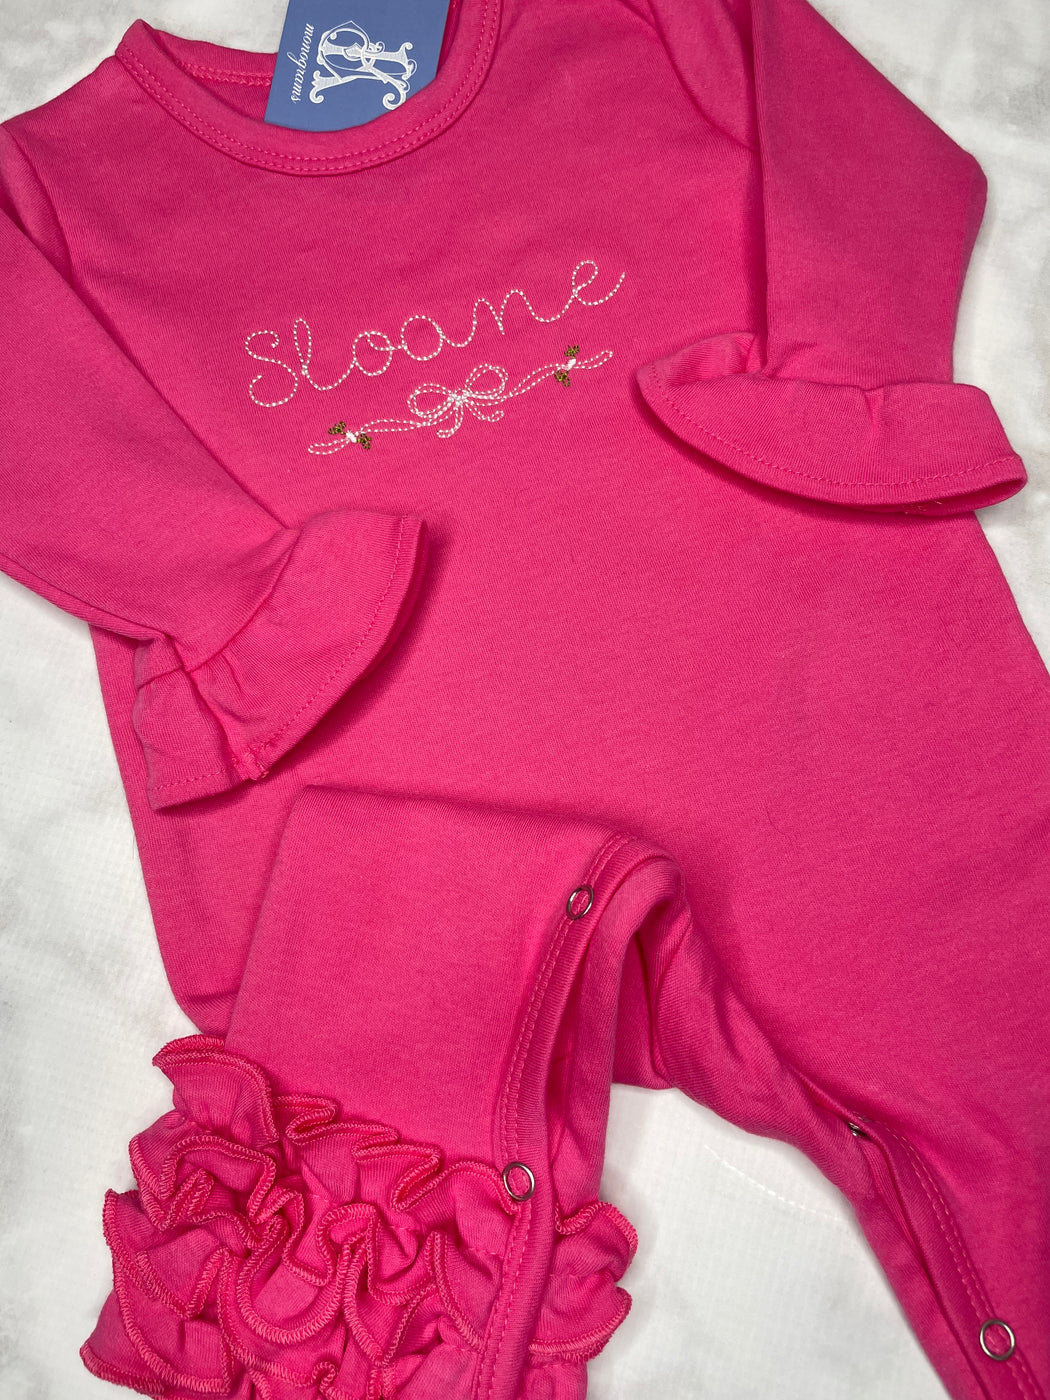 Girls Baby Personalized Long Sleeve Romper with Ruffle Trim